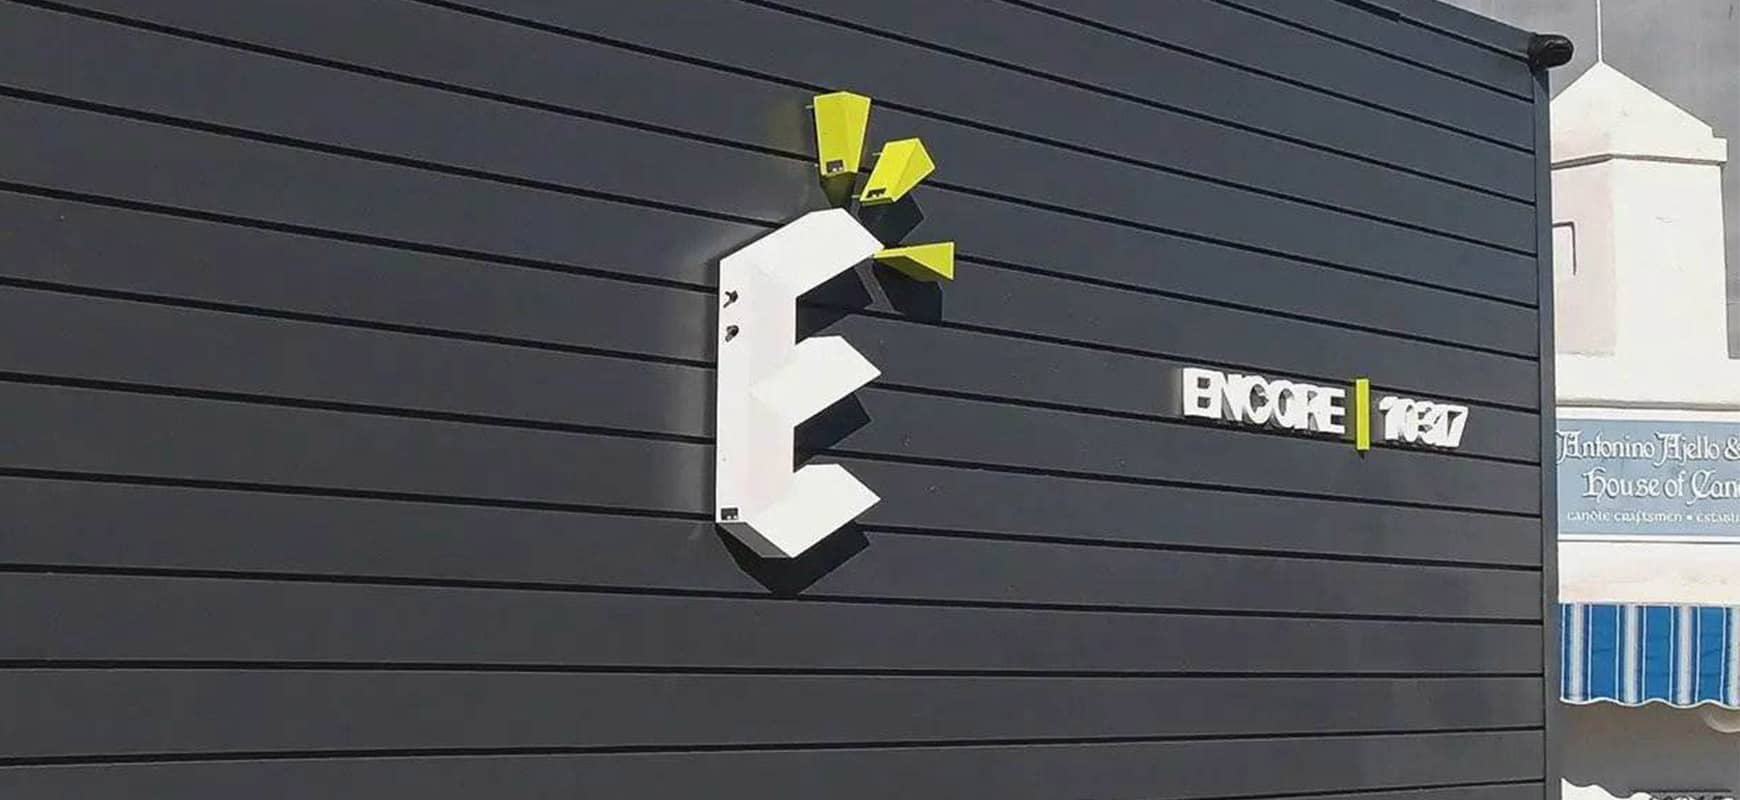 Encore logo sign in white and green made of lexan, aluminum and PVC for outdoor branding